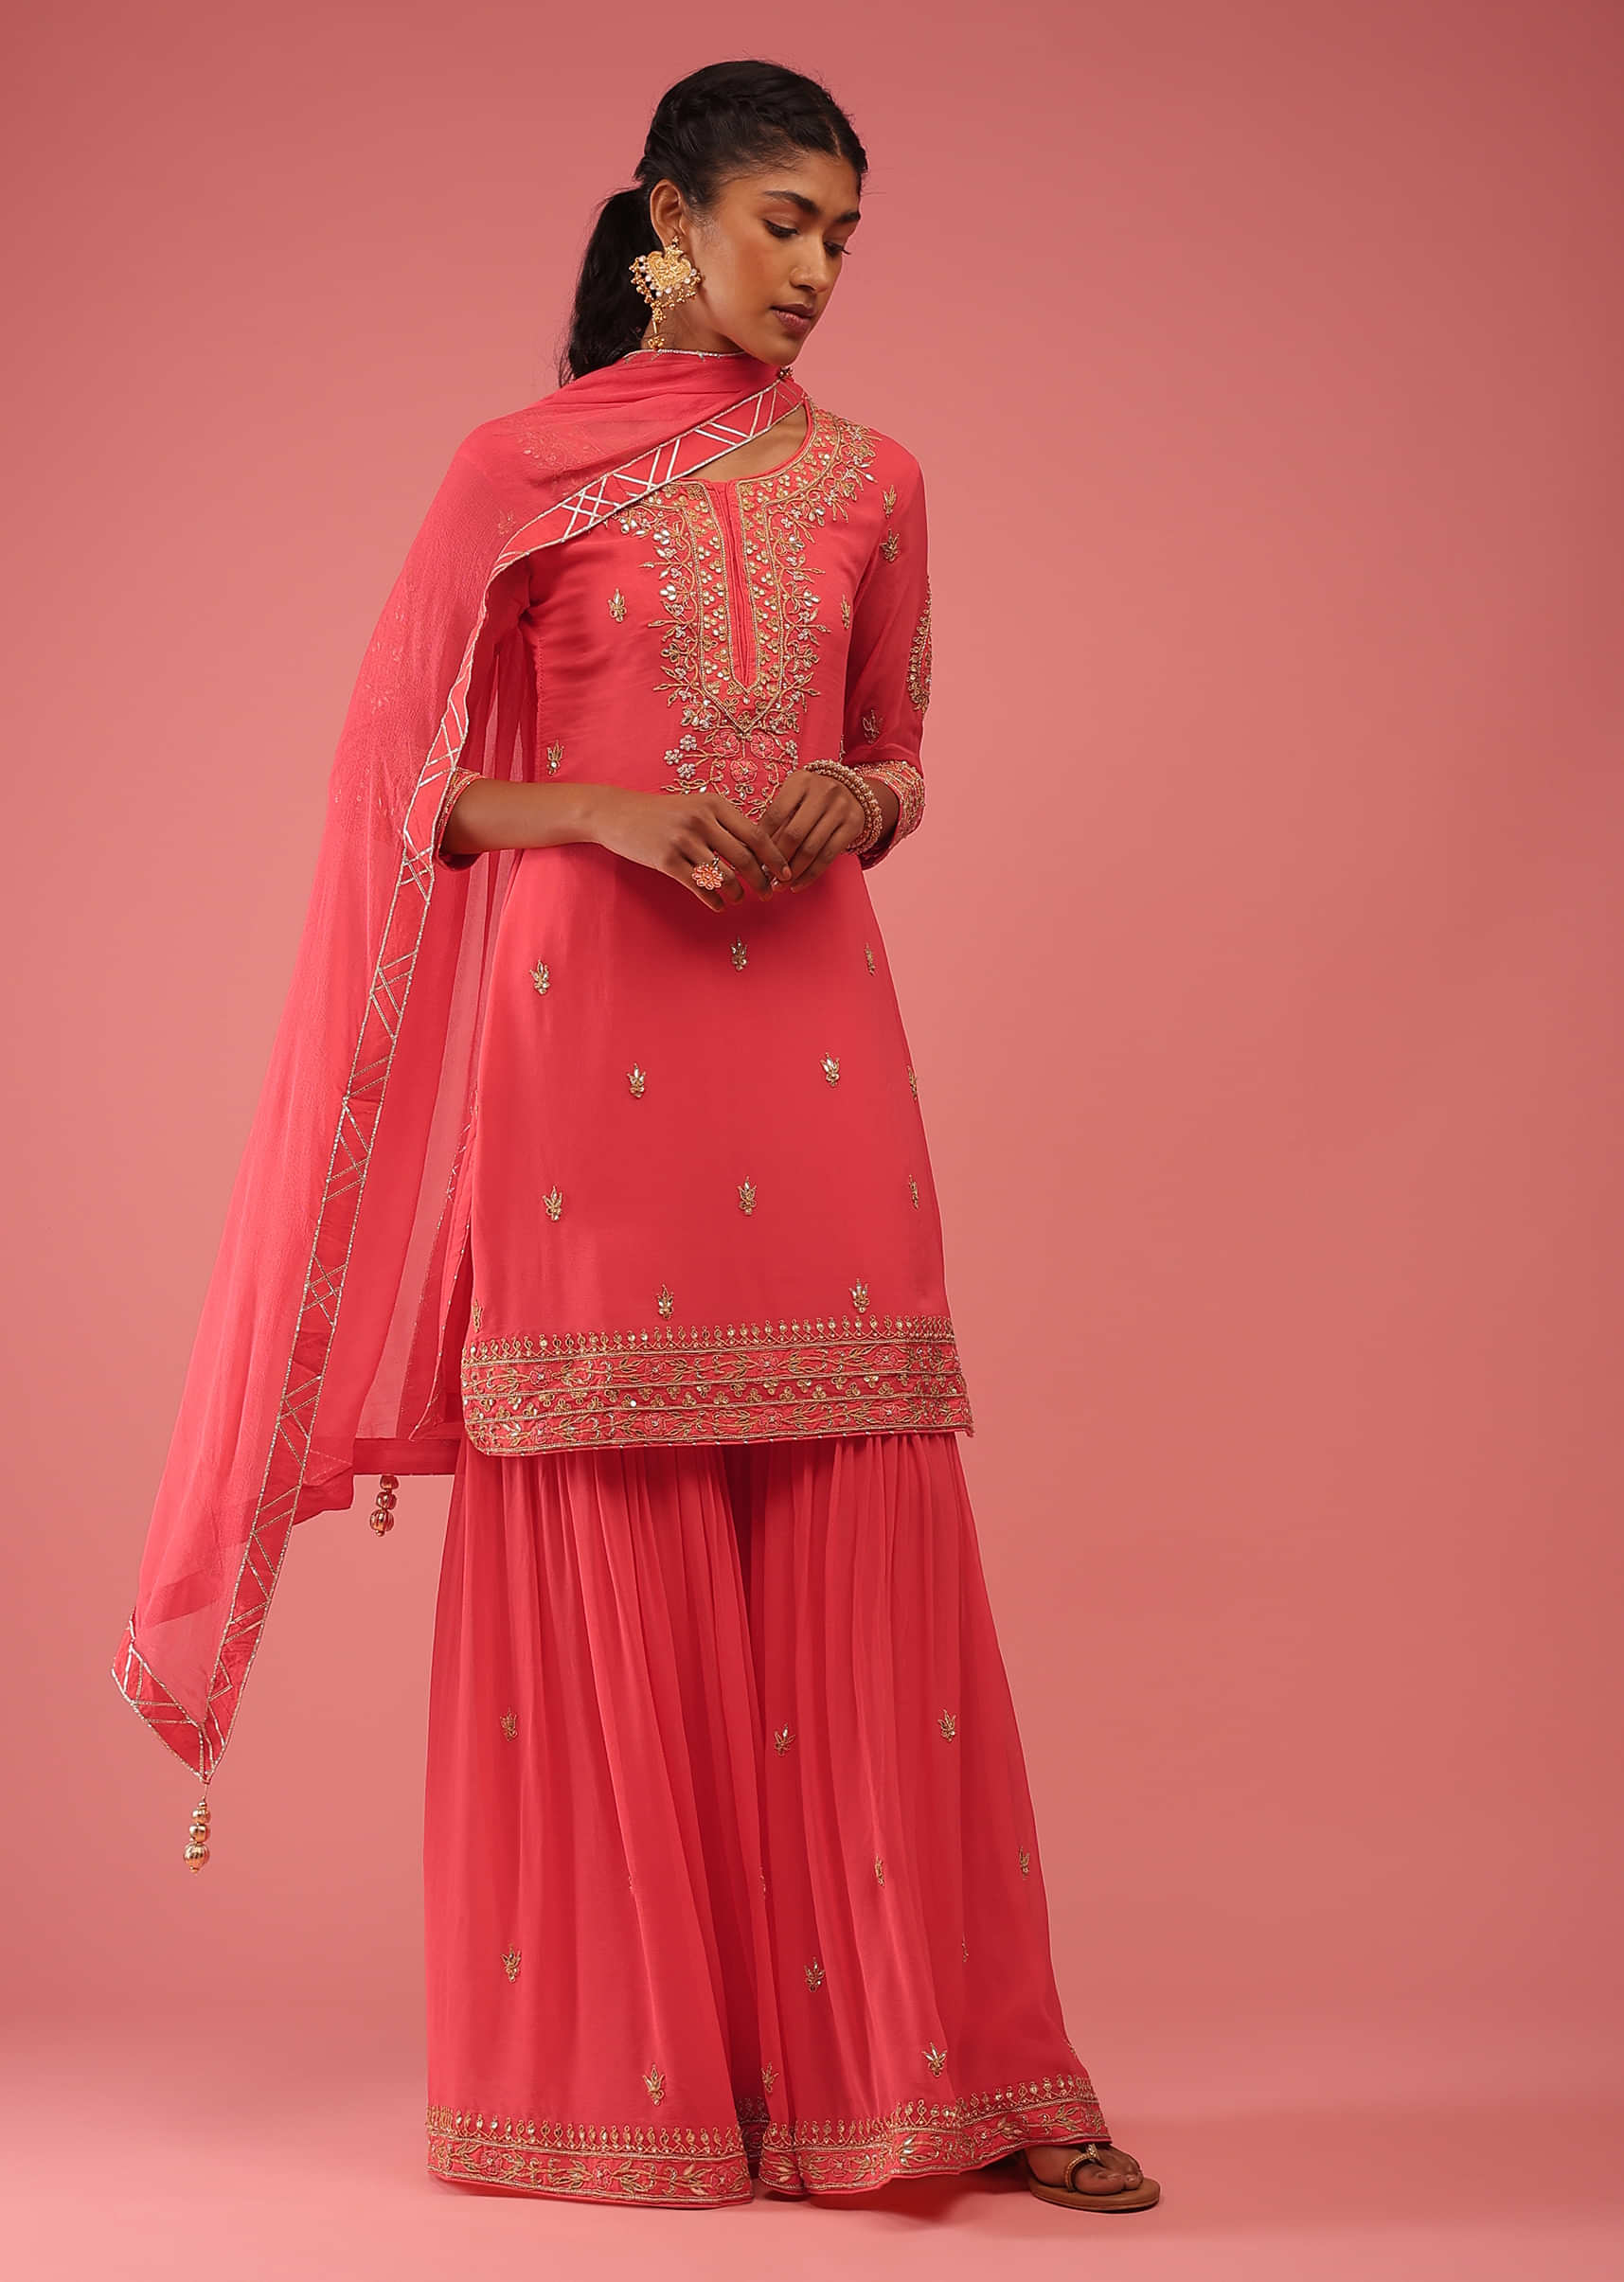 Peach Sharara Pants In Golden Zari And Gotta Patti Embroidery, Crafted In Georgette With Lacework At The Yoke